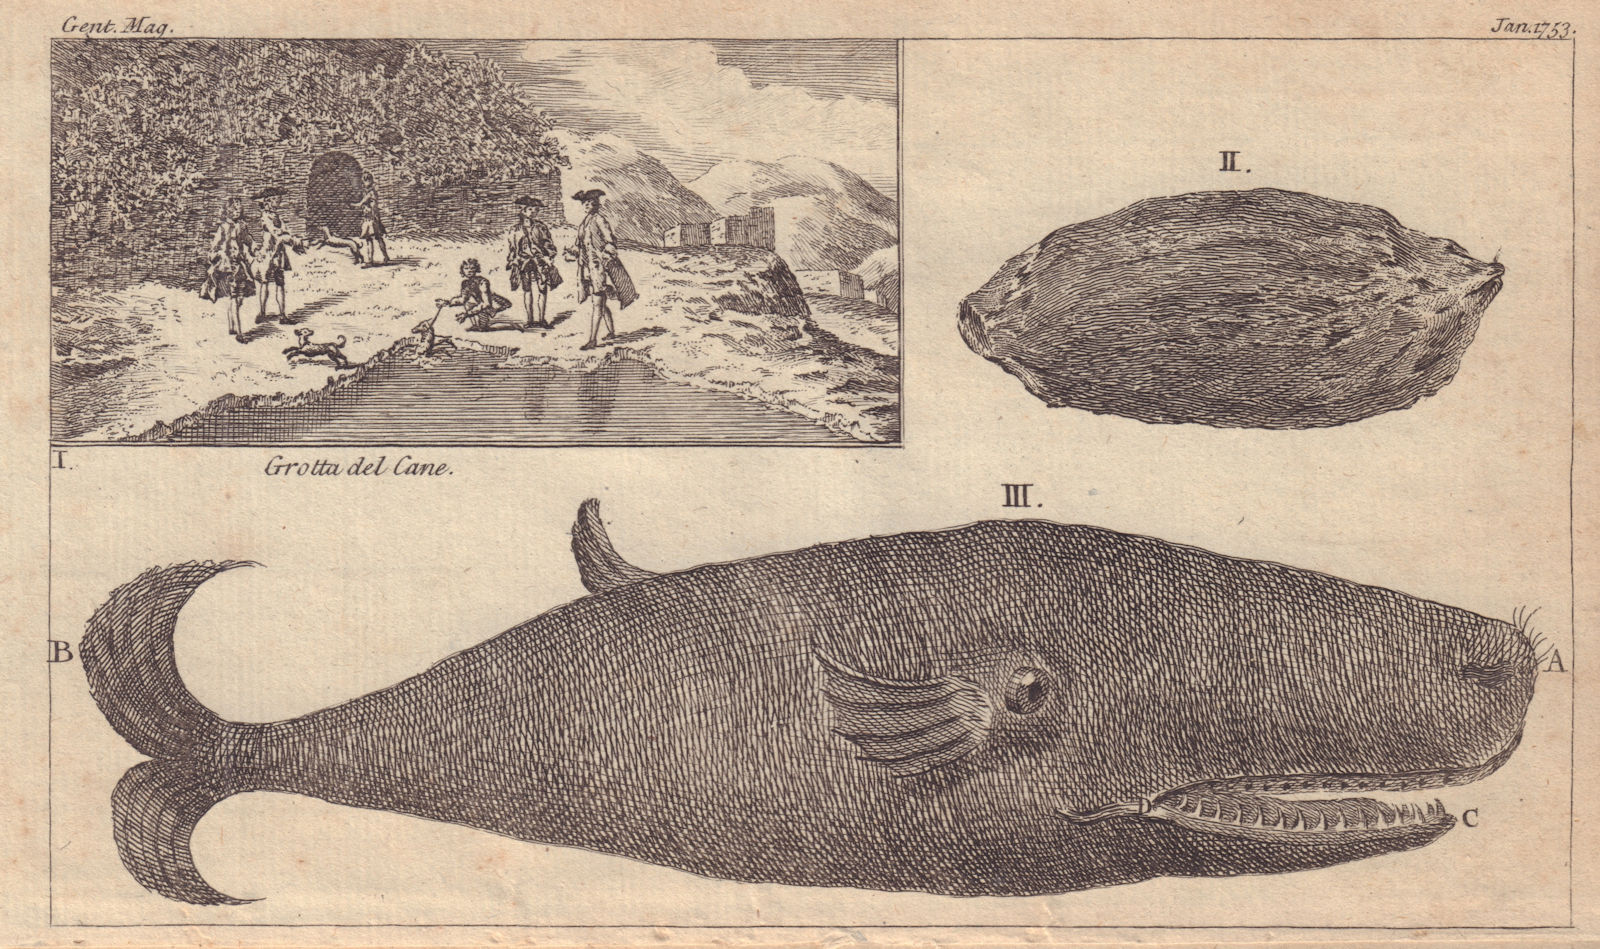 Grotta del Cane, Naples. The Egg Fish. The Spermaceti Whale. GENTS MAG 1753